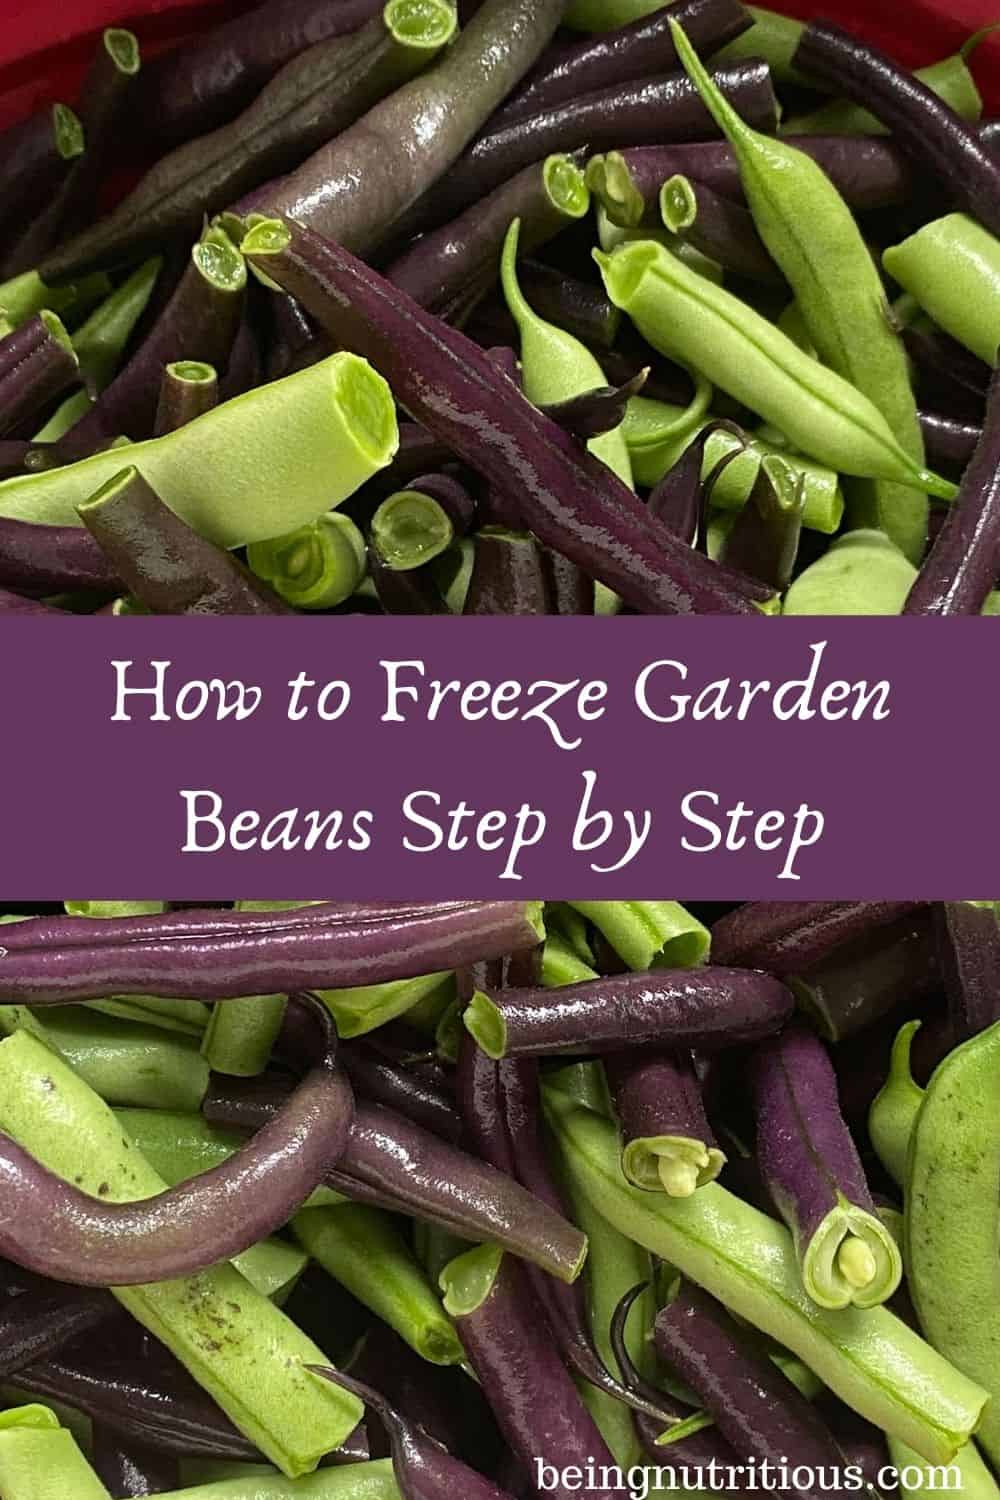 Close up of fresh beans, trimmed and snapped. Text overlay in purple rectangle: How to Freeze Garden Beans Step by Step.